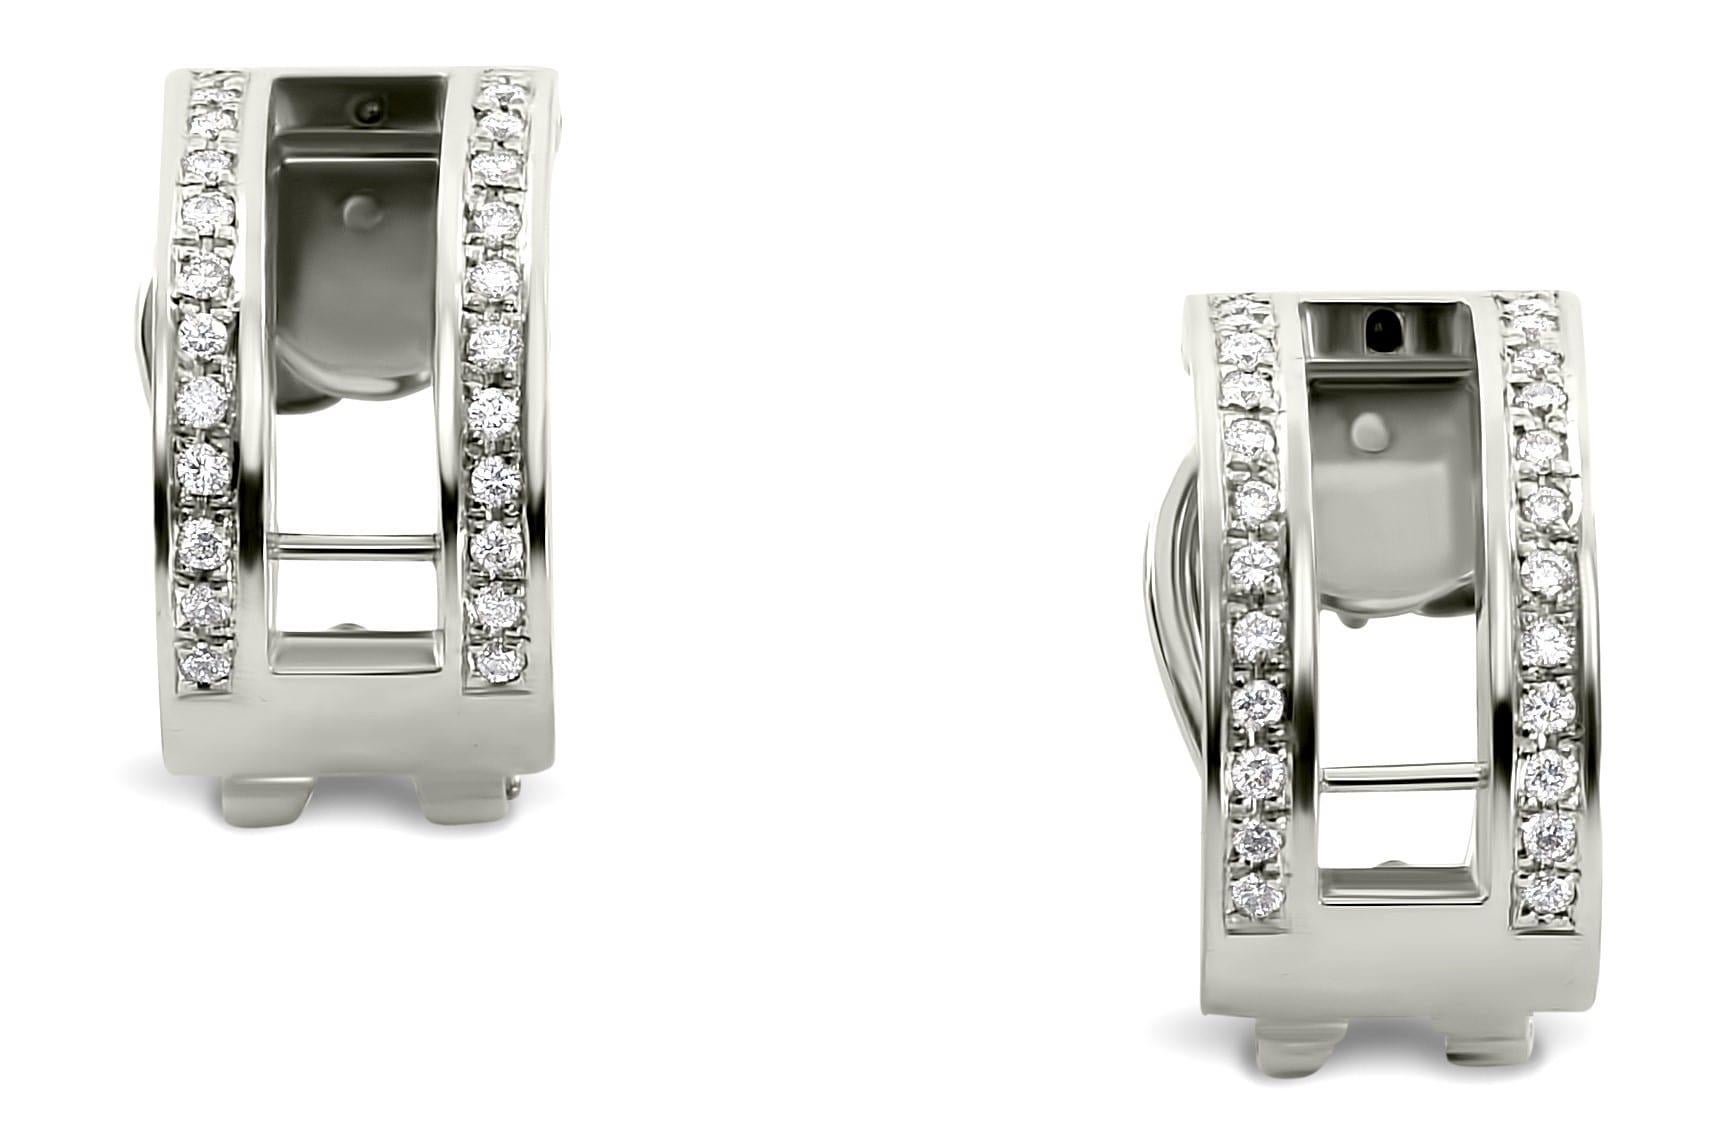 These exquisite hand crafted earrings feature two rows of the finest available brilliant cut diamonds, set in solid 18k white gold. Each insert boasts hand selected rubies, tsavorites and sapphires in a calibrated setting. The ingenious design